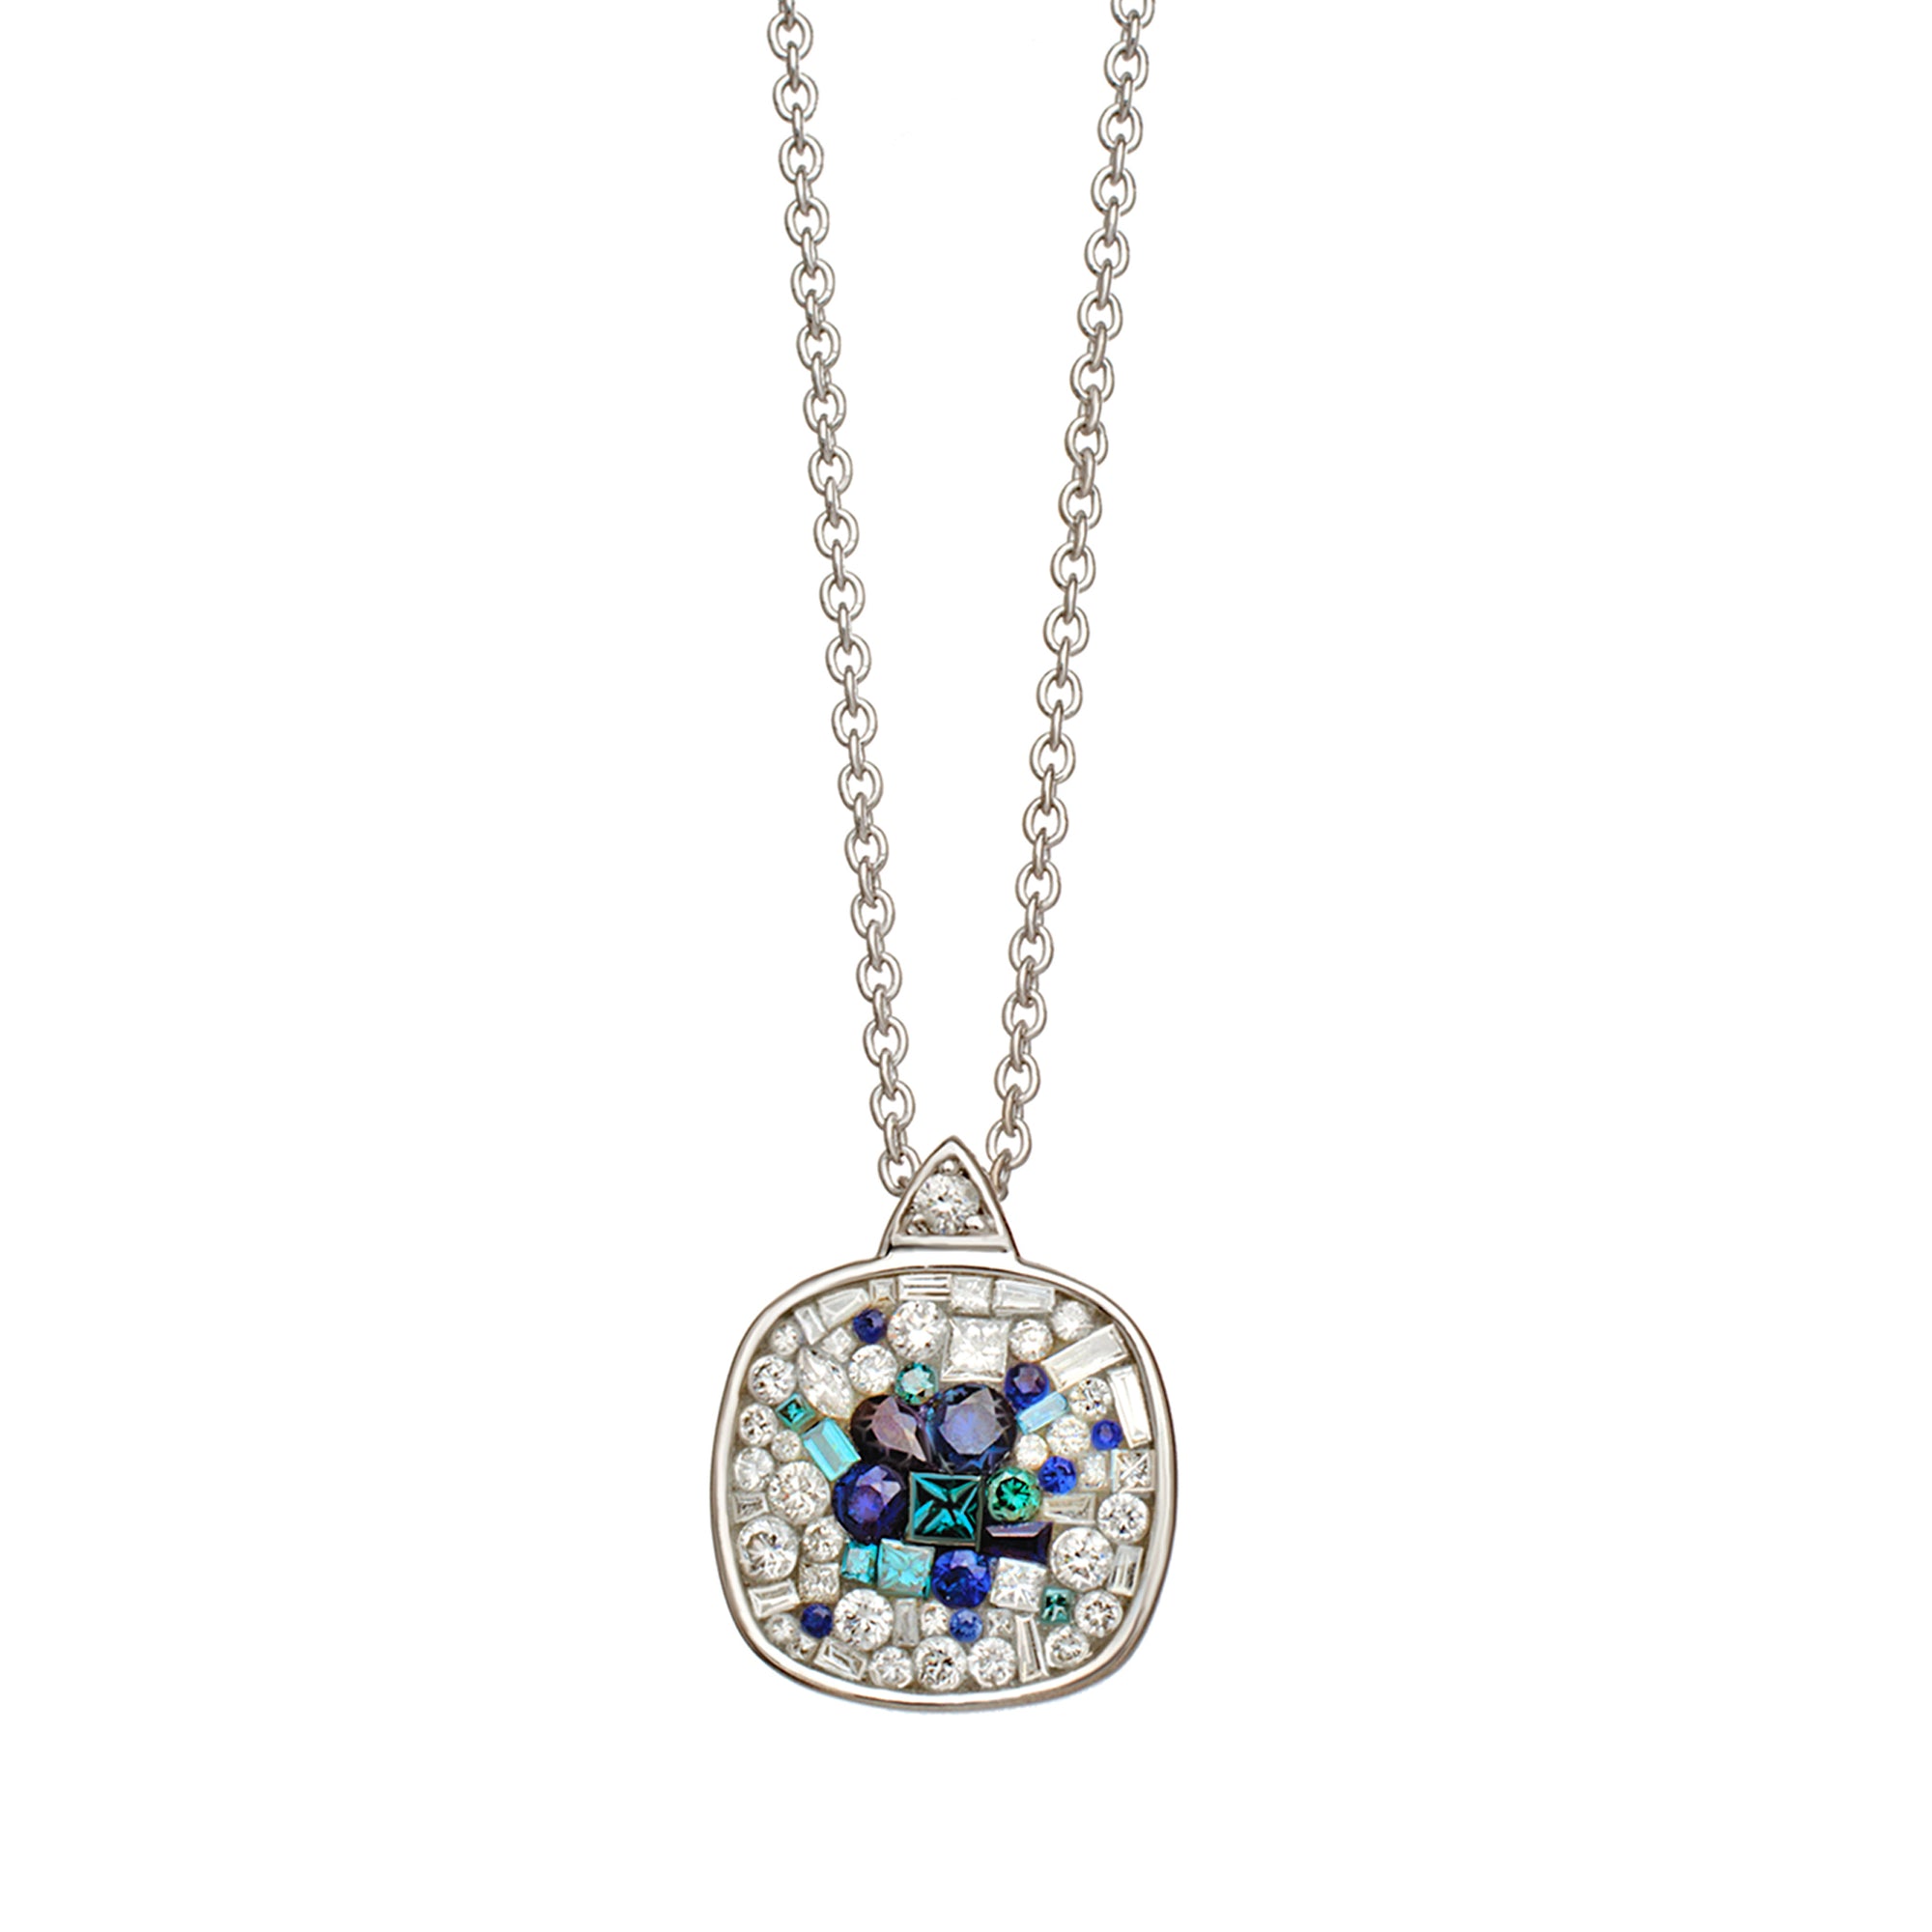 Blue Galaxy Diamond Cushion Pendant Necklace by Pleve available at Talisman Collection Fine Jewelers in El Dorado Hills, CA and online. Specs: 1.40 cts white & color enhanced diamonds; 18k white gold Story: